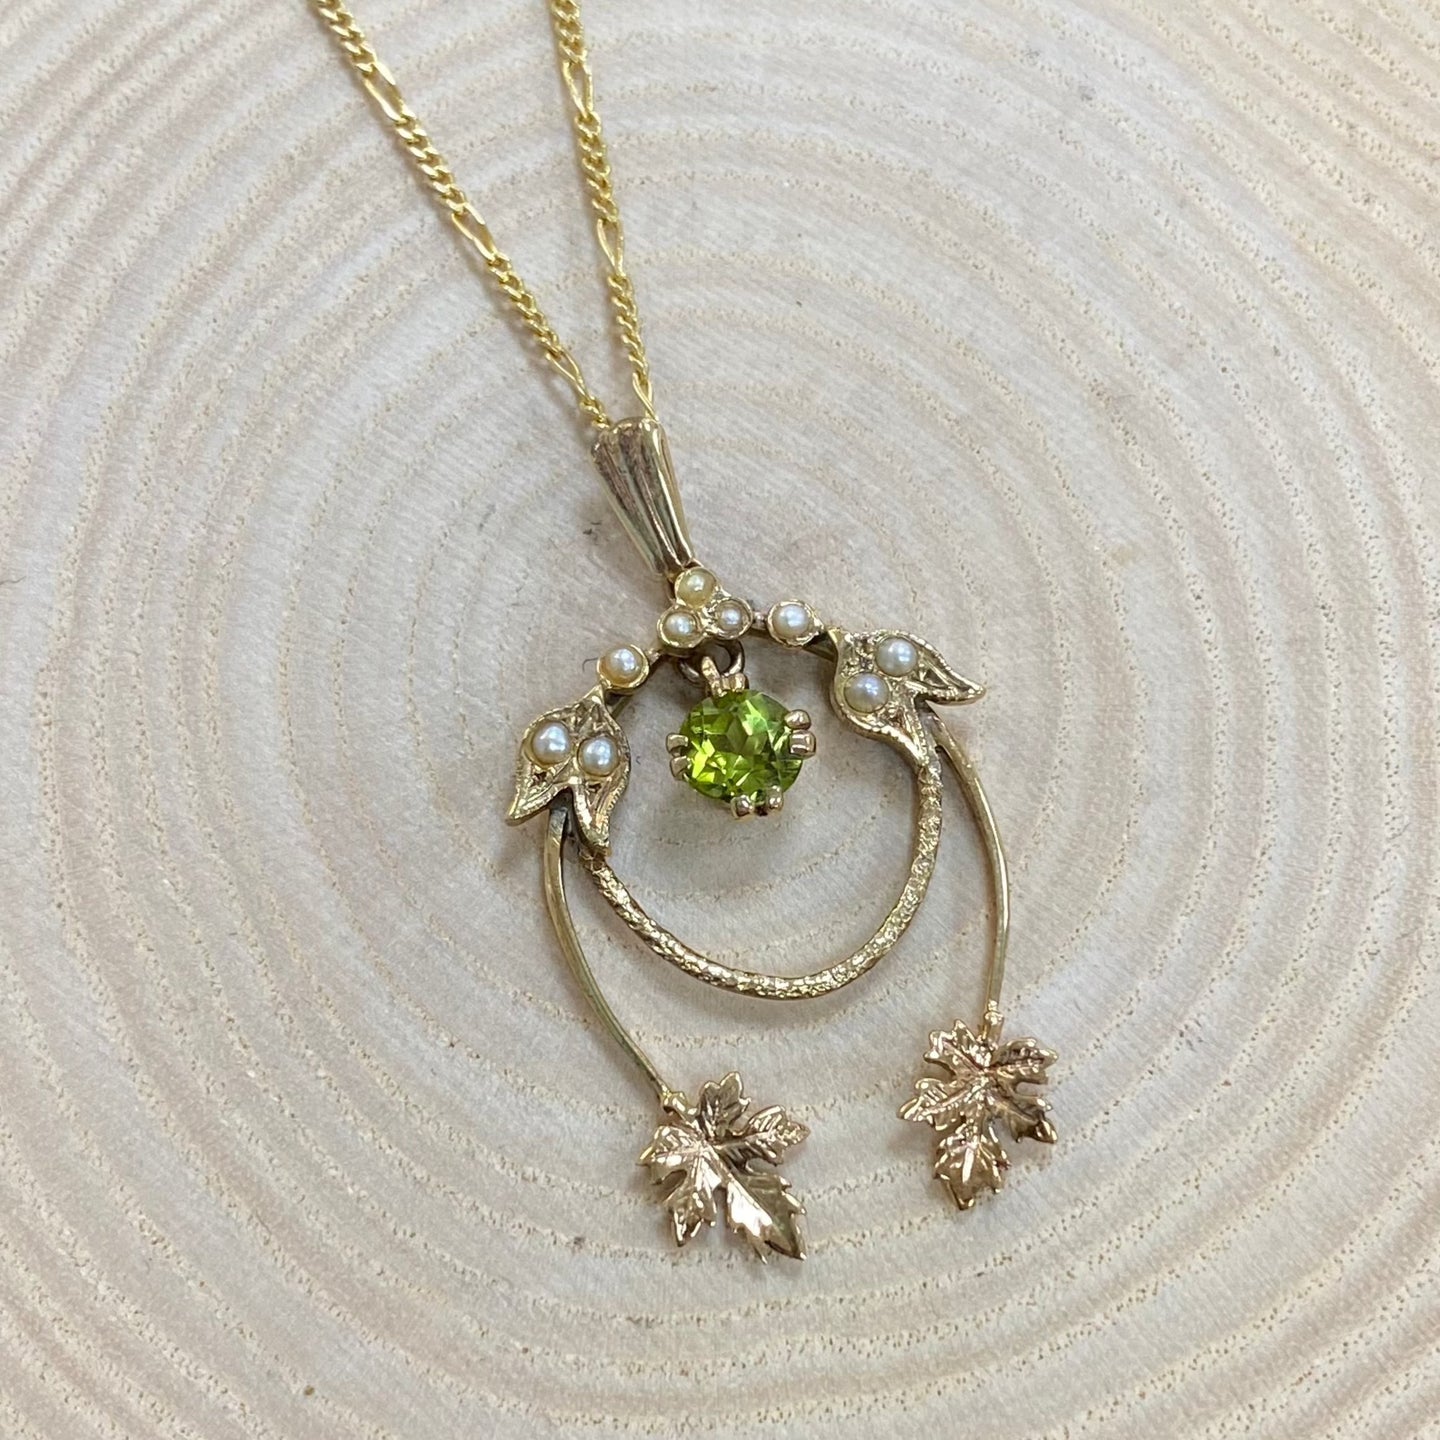 Preloved 9ct Yellow Gold Peridot and Pearl Pendant